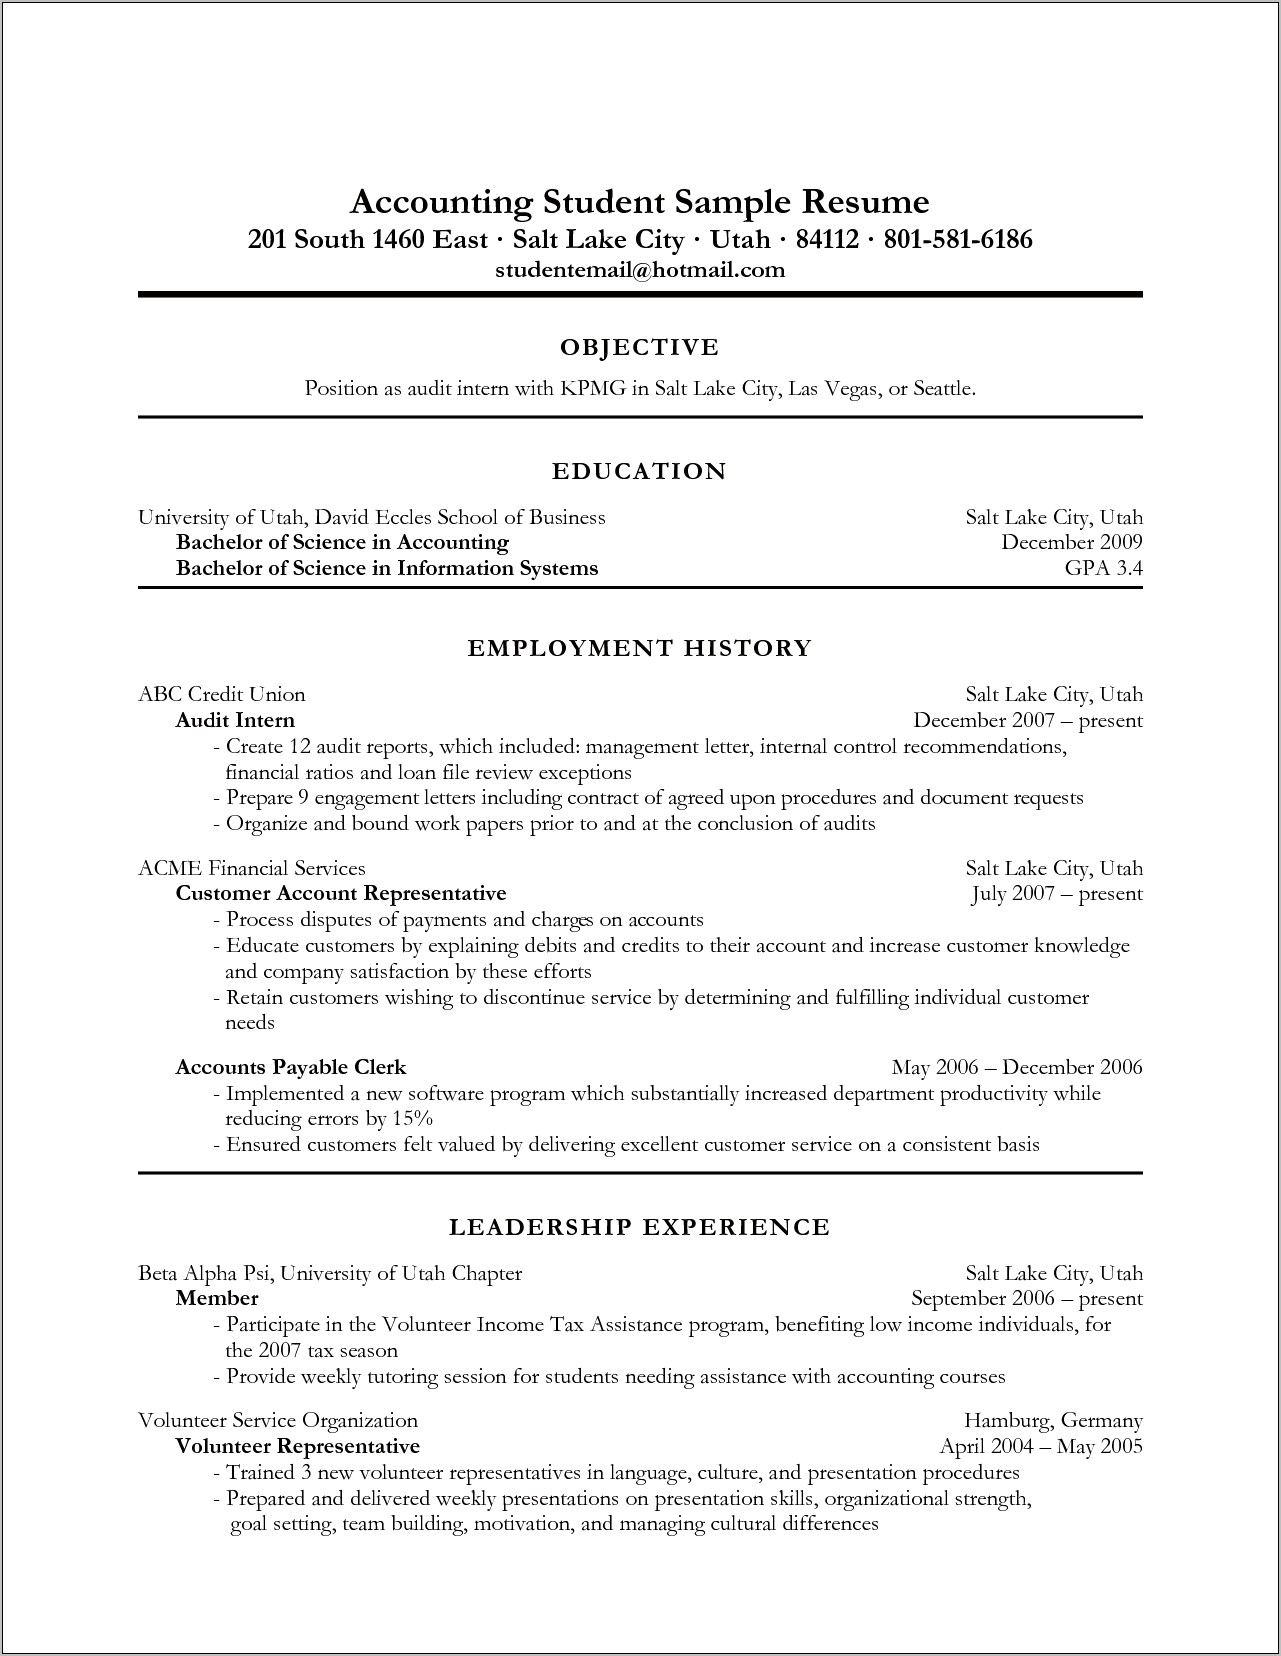 Sample Resume Objective Statements For Student